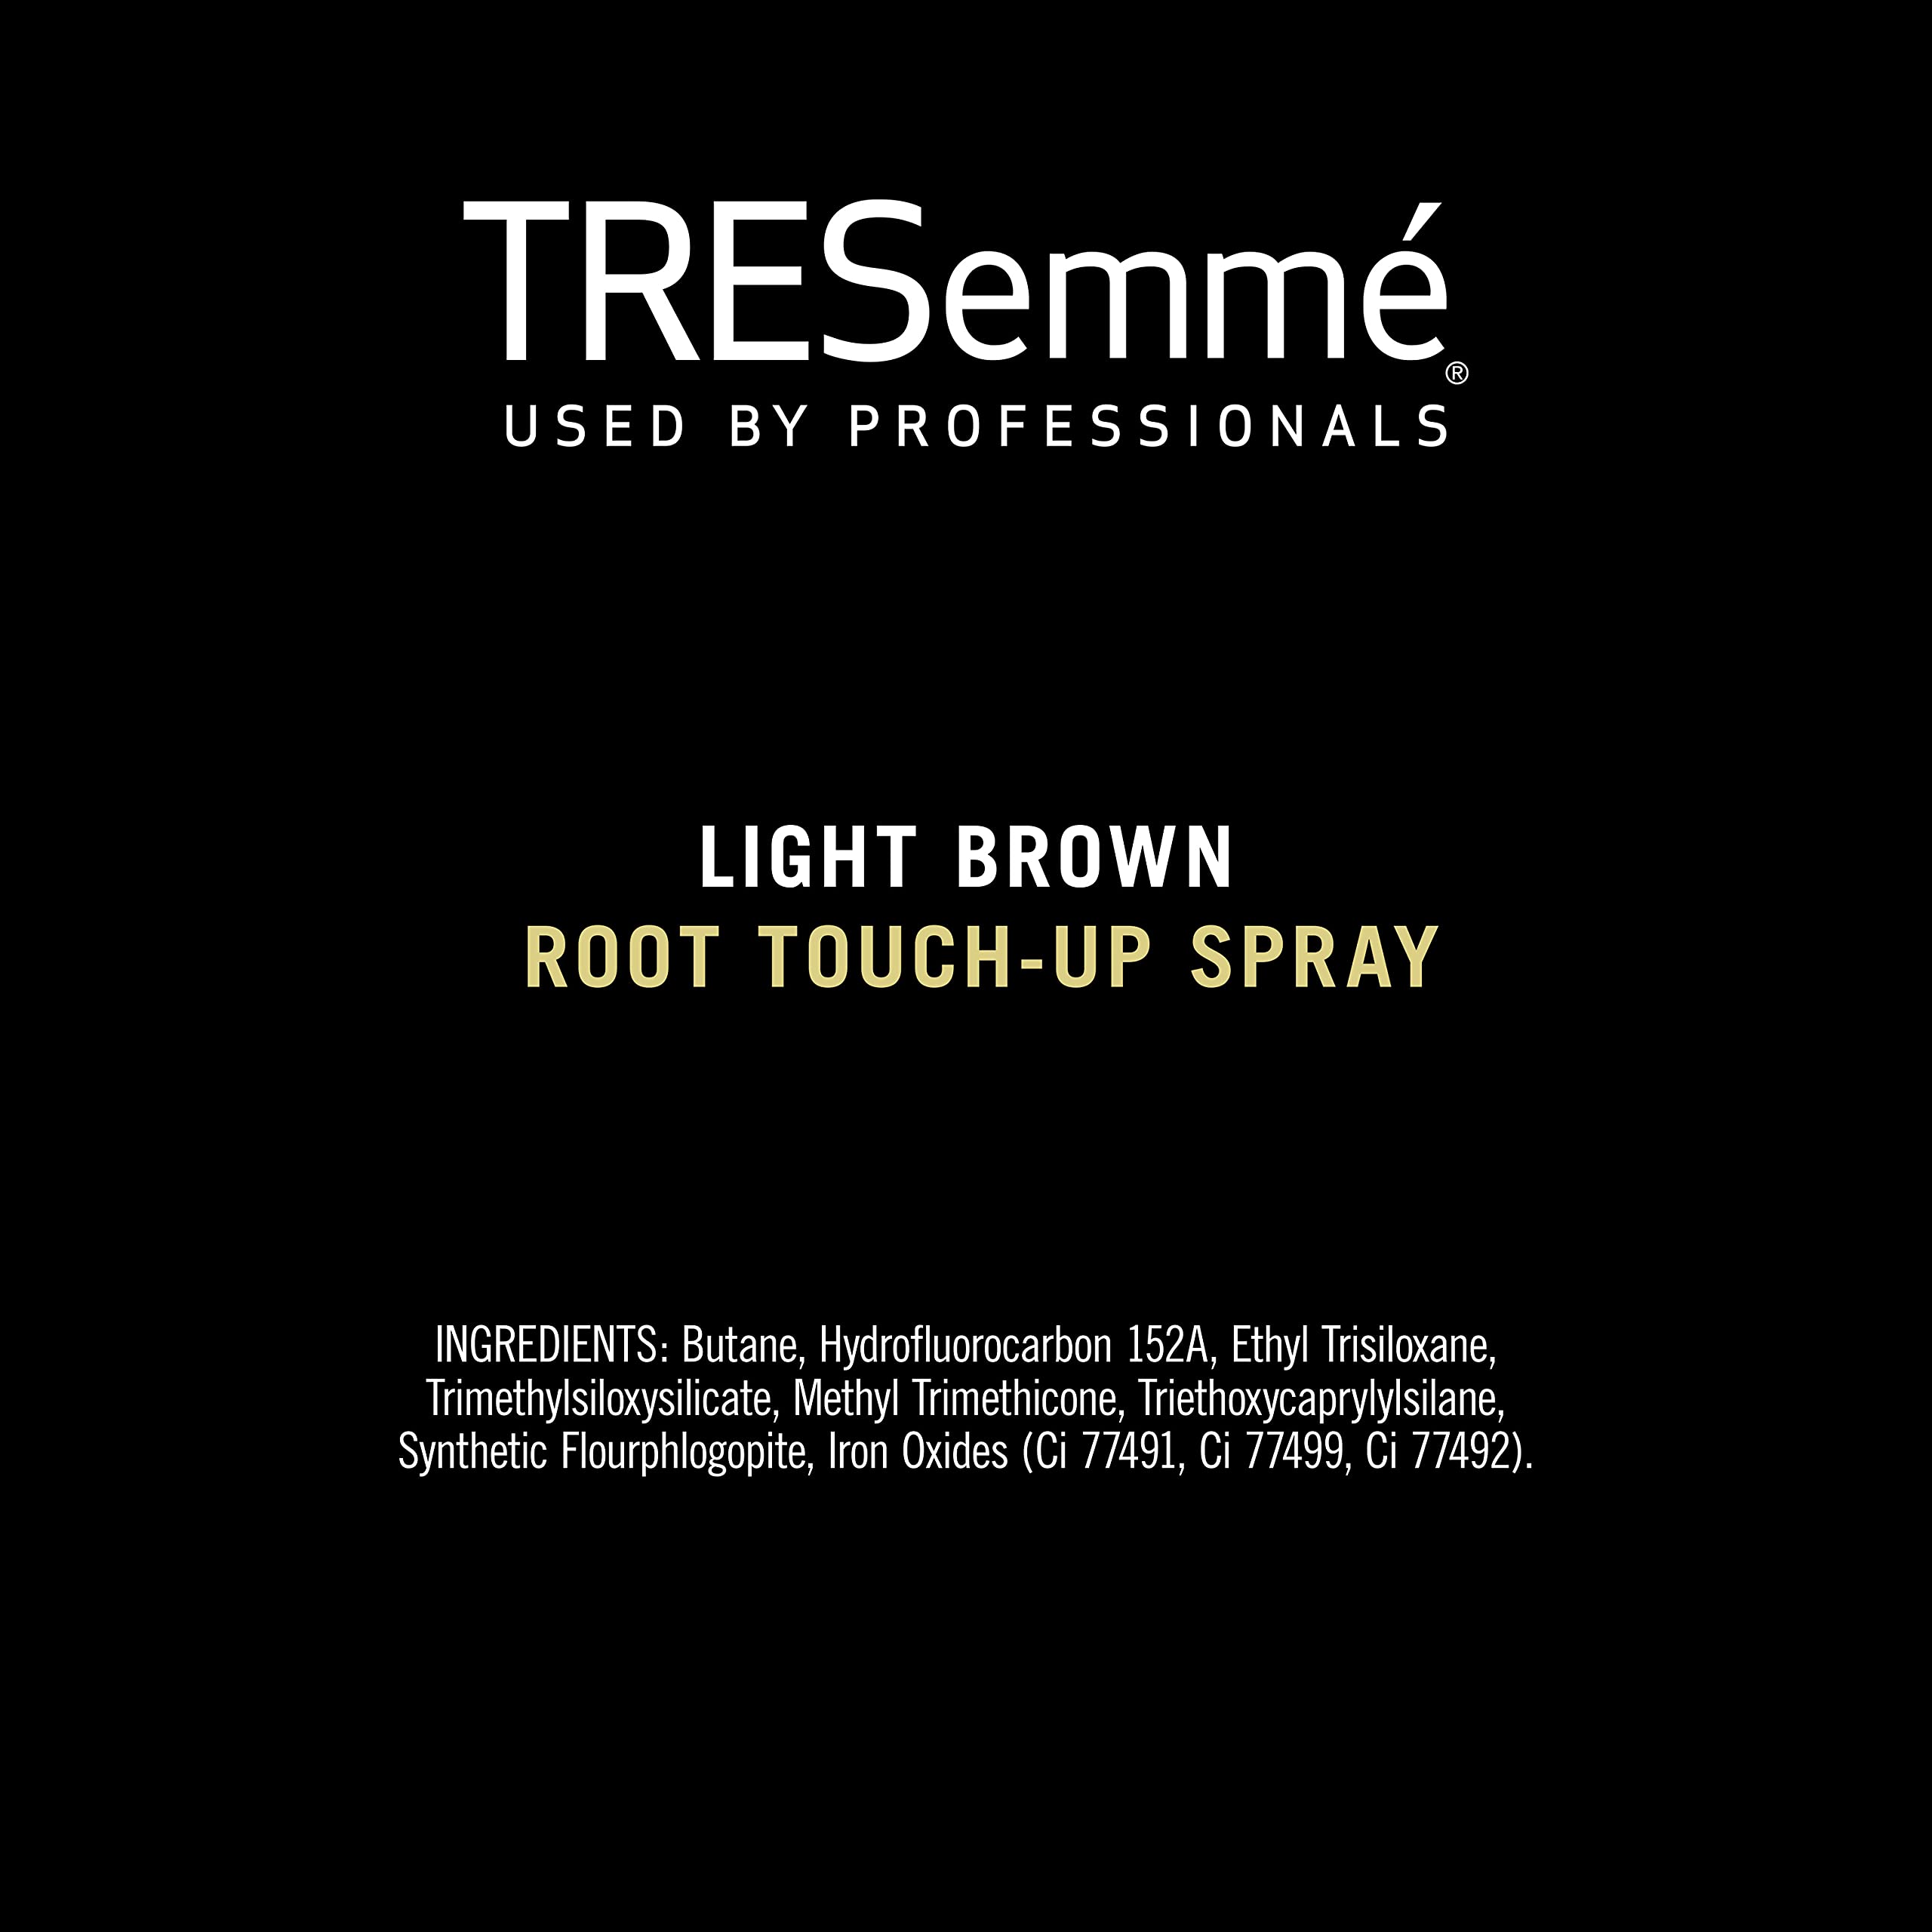 TRESemmé Root Touch-Up, Light Brown Hair Temporary Hair Color, Ammonia-free, Peroxide-free Root Cover Up Spray 2.5 oz